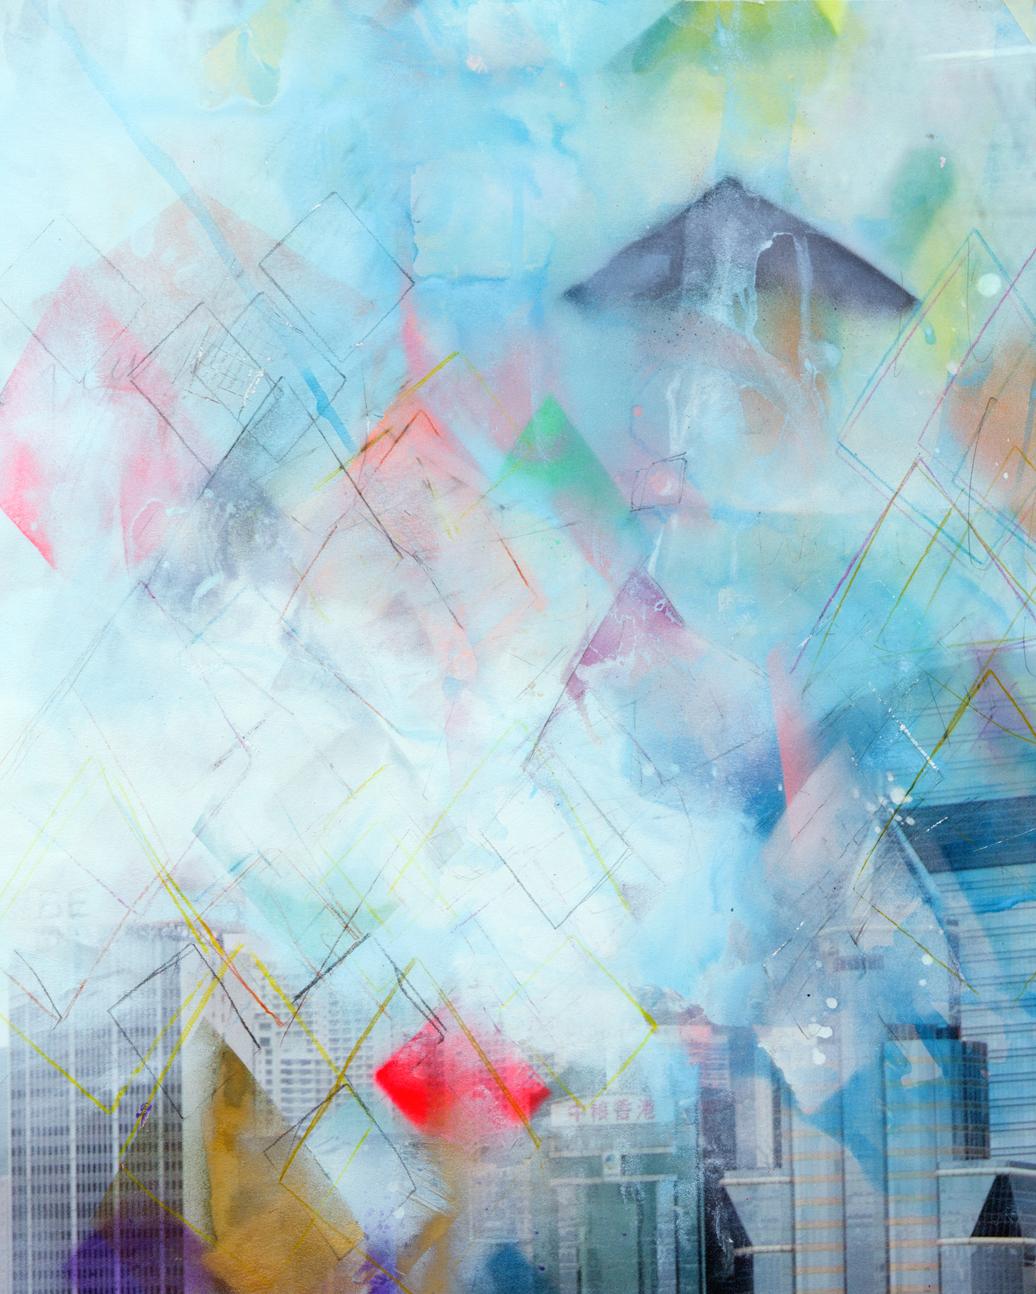 Unforgotten Series #1 - Handpainted photography, colorful abstract urban scene